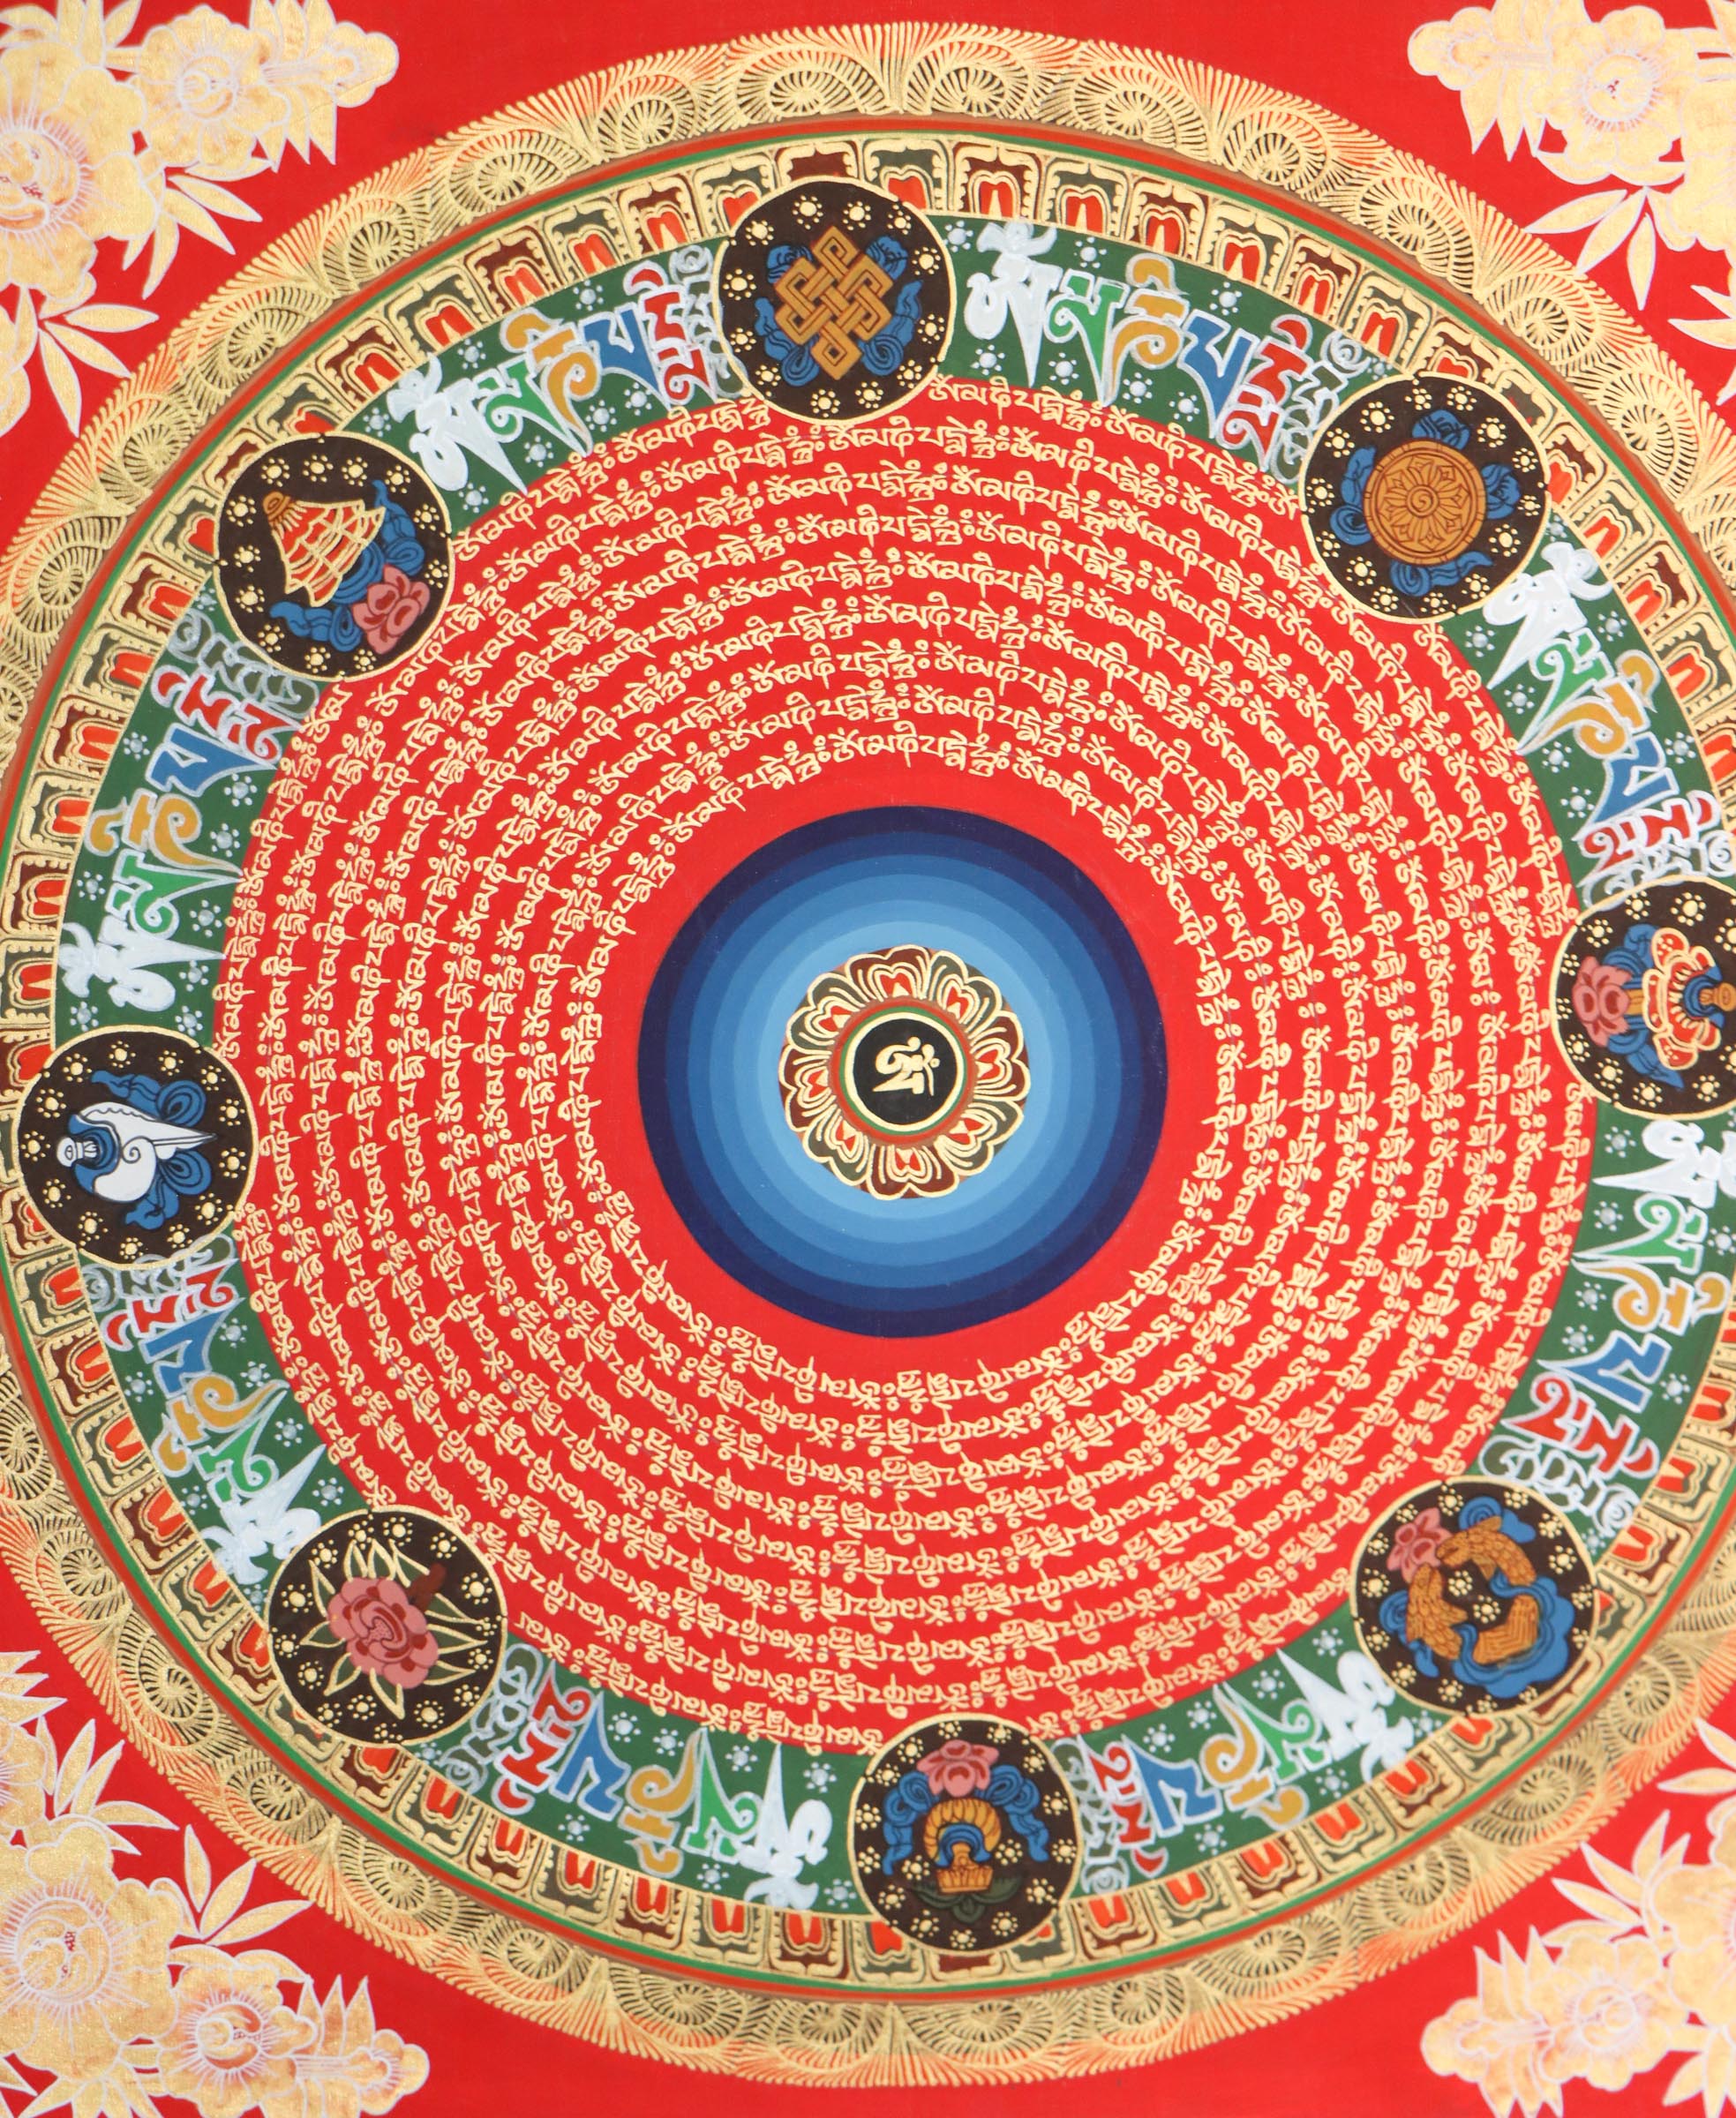 Mantra Mandala Thangka for good fortune, wealth, and spiritual well-being.